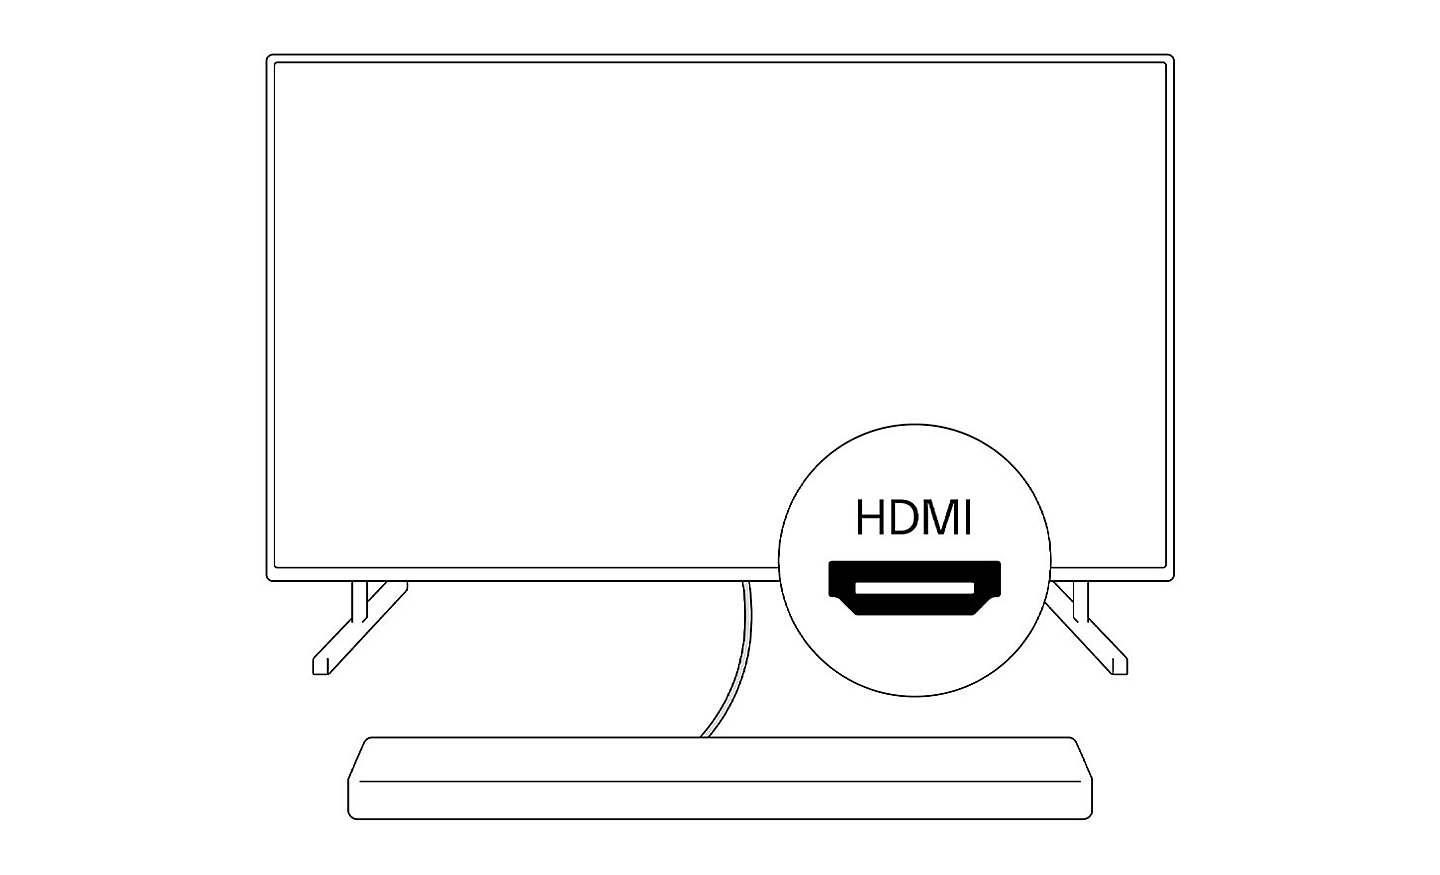 Outline image of a soundbar connecting to a TV with a HDMI icon in a circle